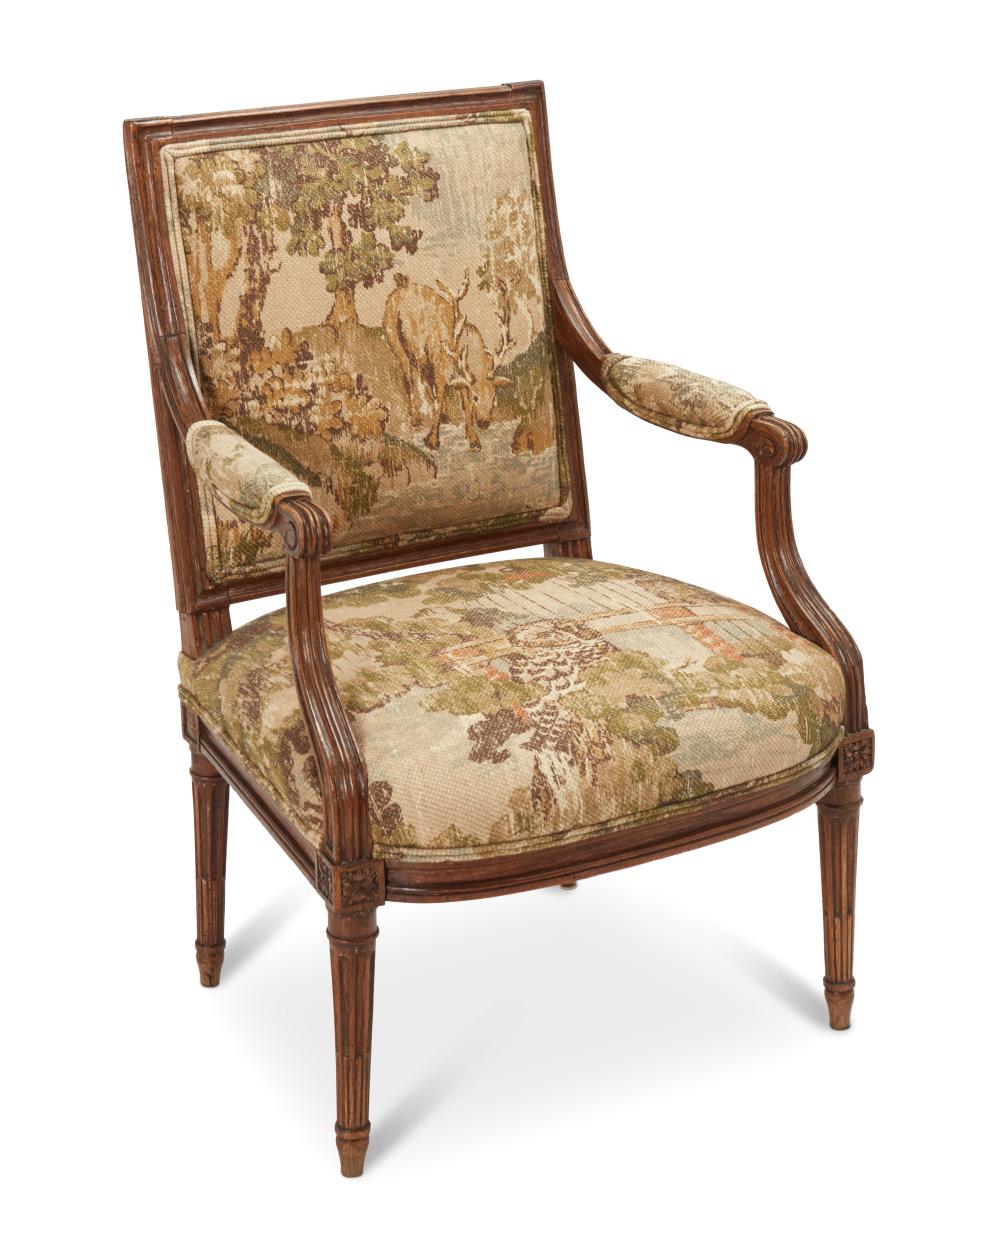 A FRENCH LOUIS XVI FAUTEUIL ARMCHAIR 2eed17